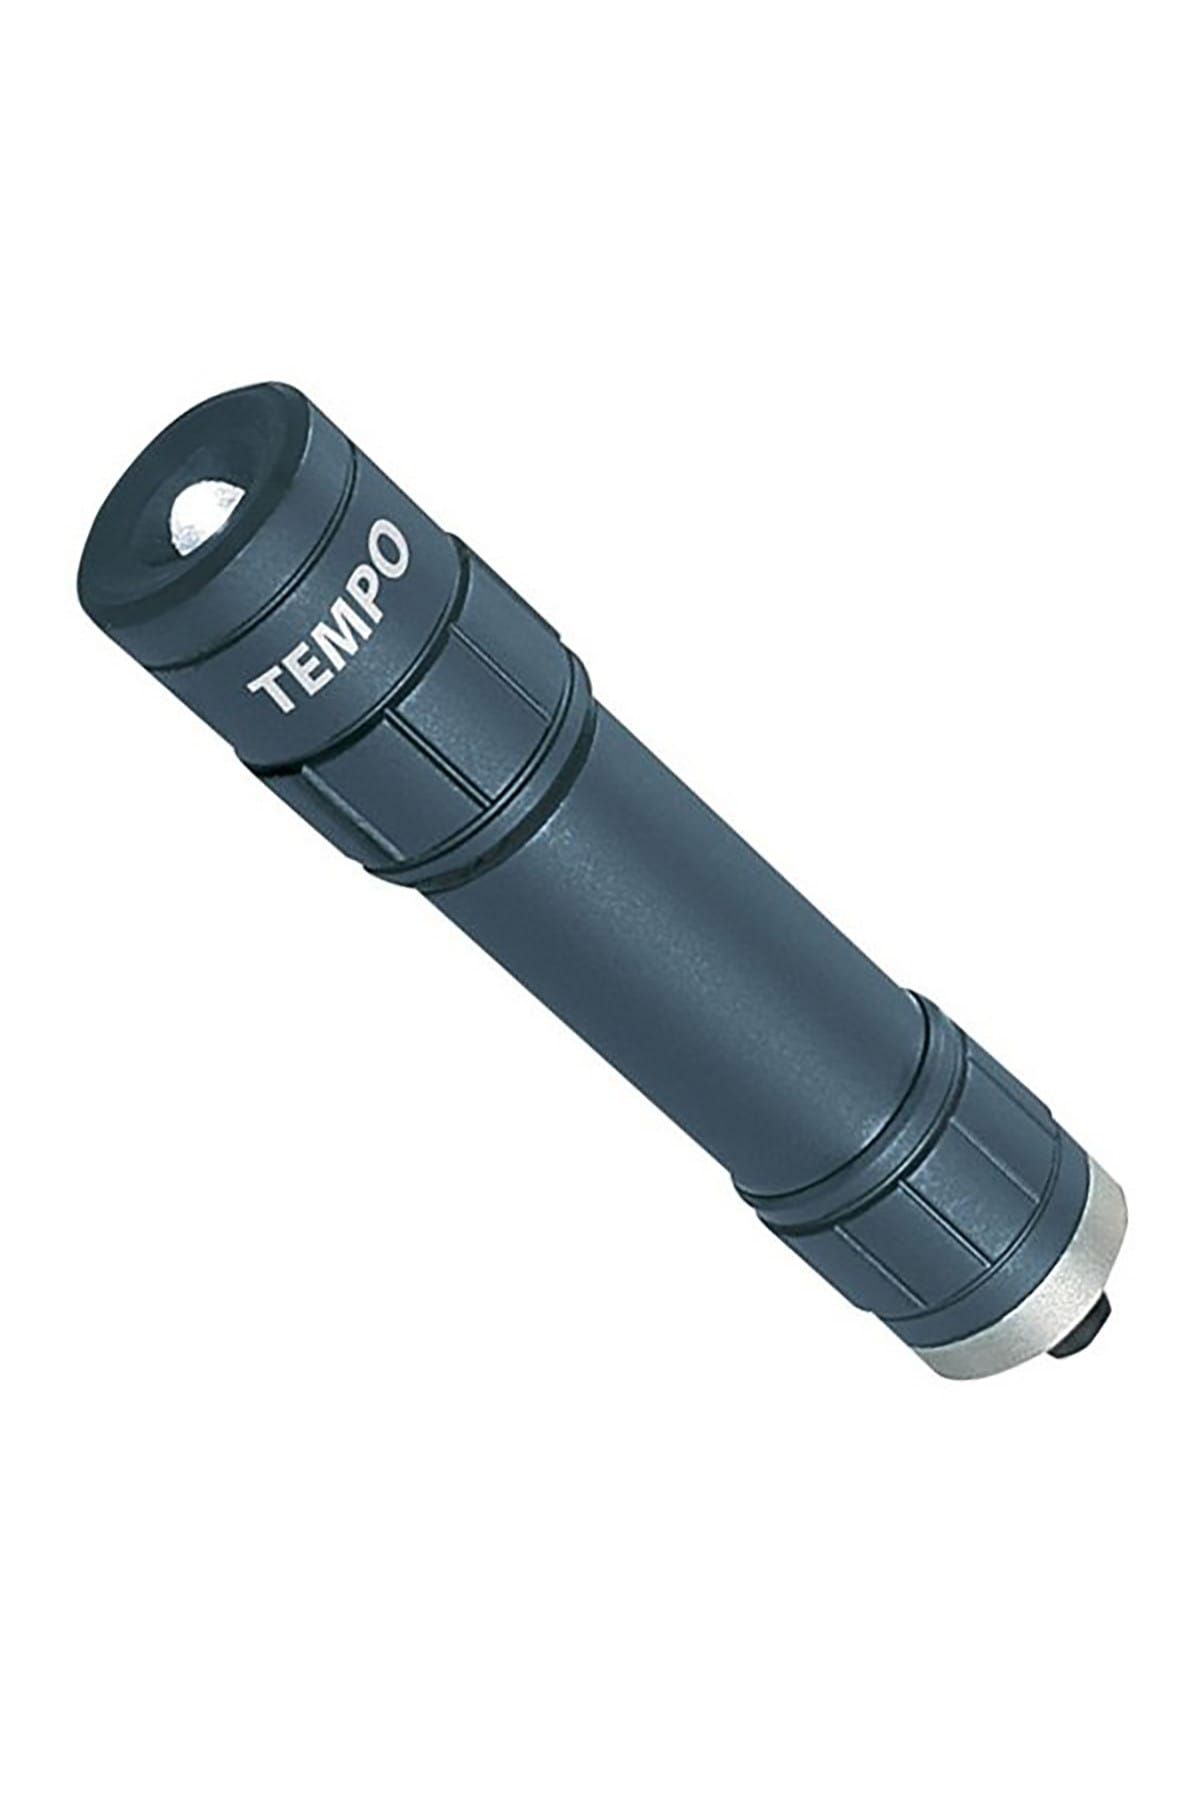 Gerber Tempo Compact Led Fener (22-80107)